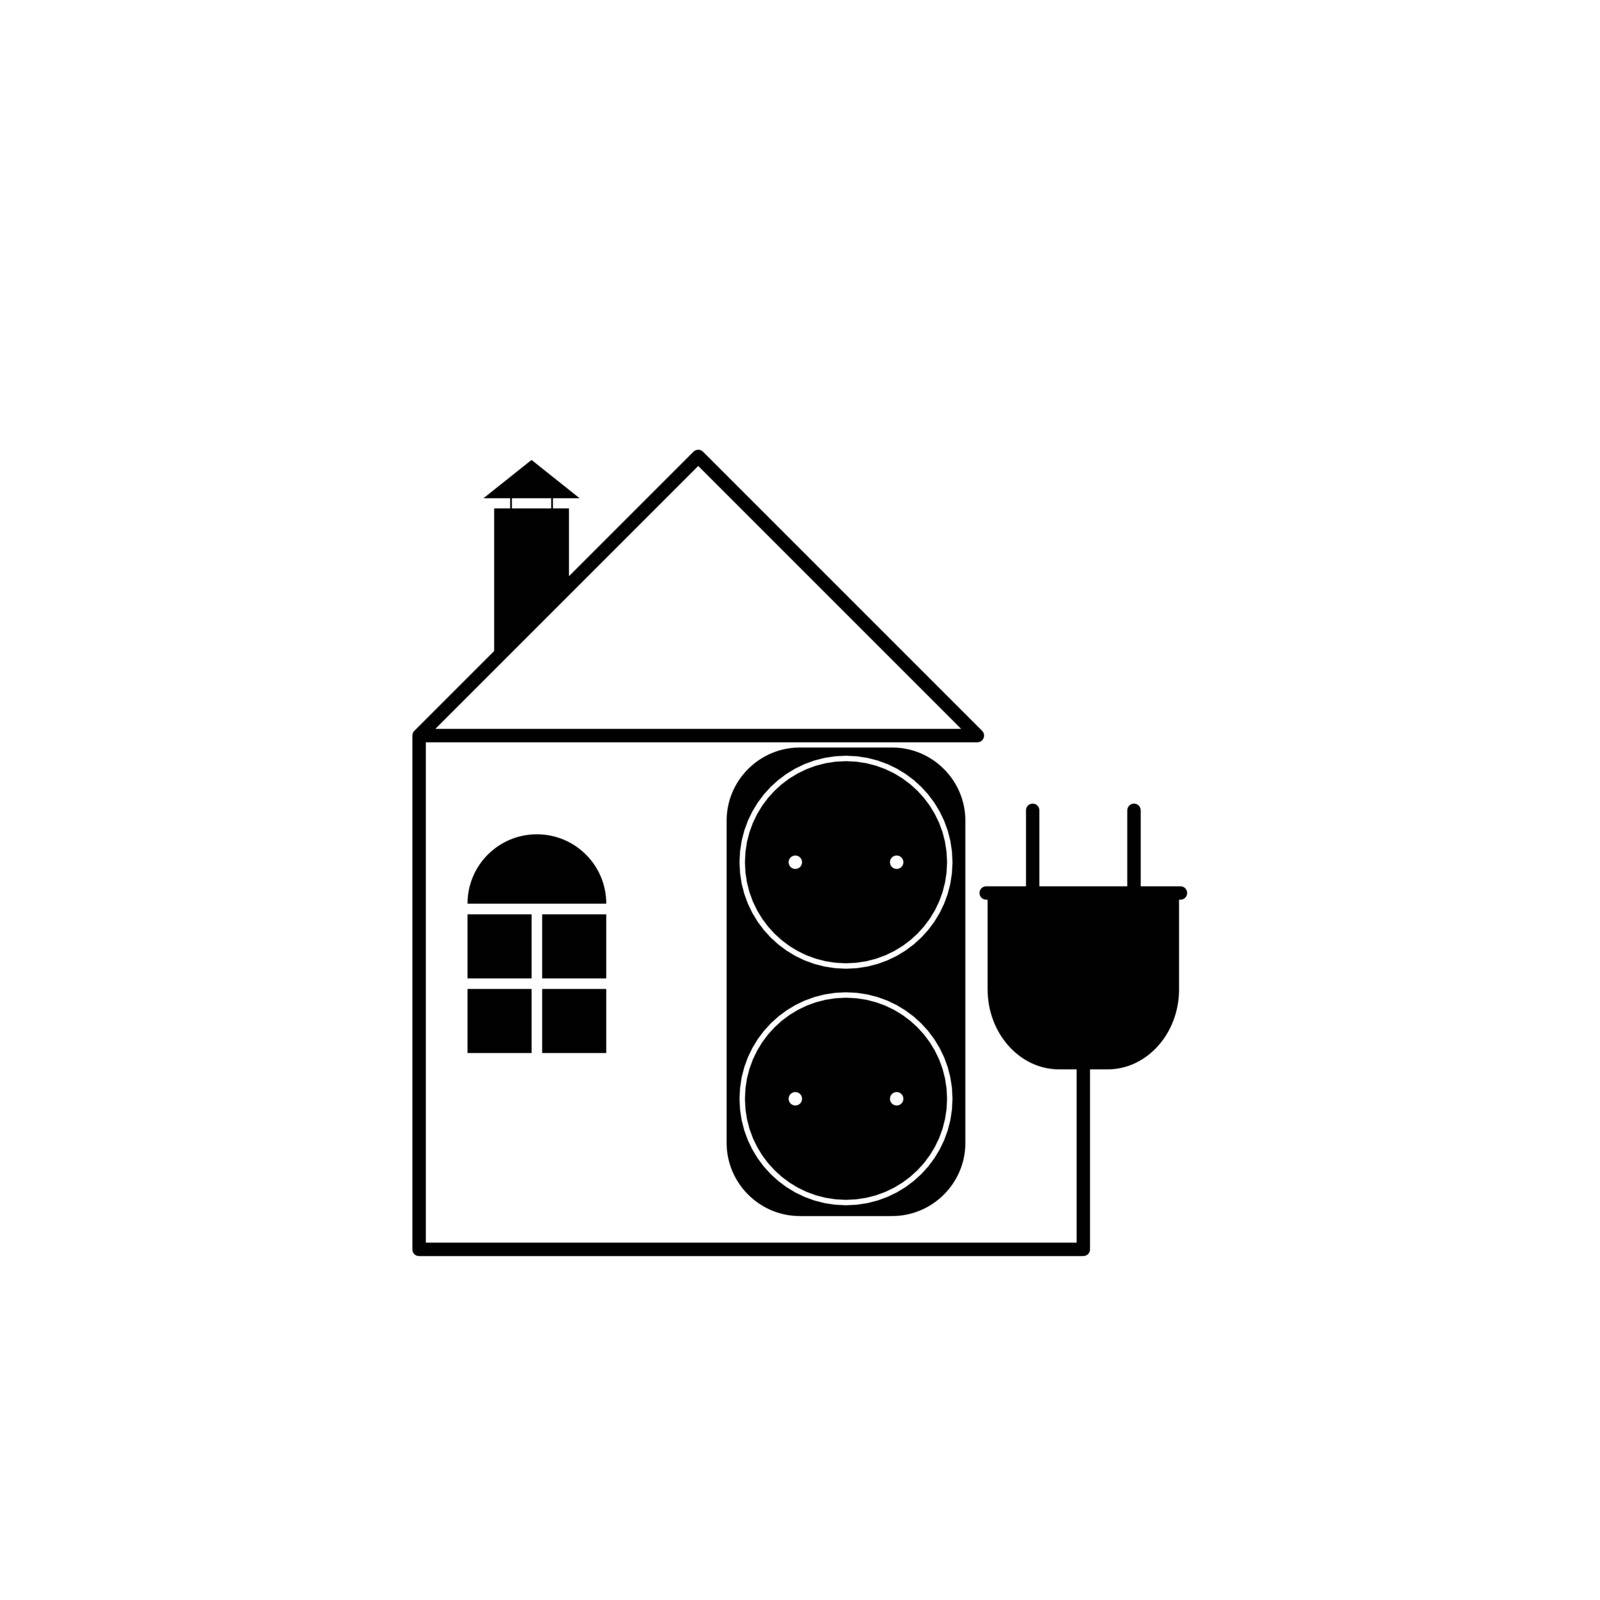 Flat image with the image of a house and an electrical plug and  by Grommik